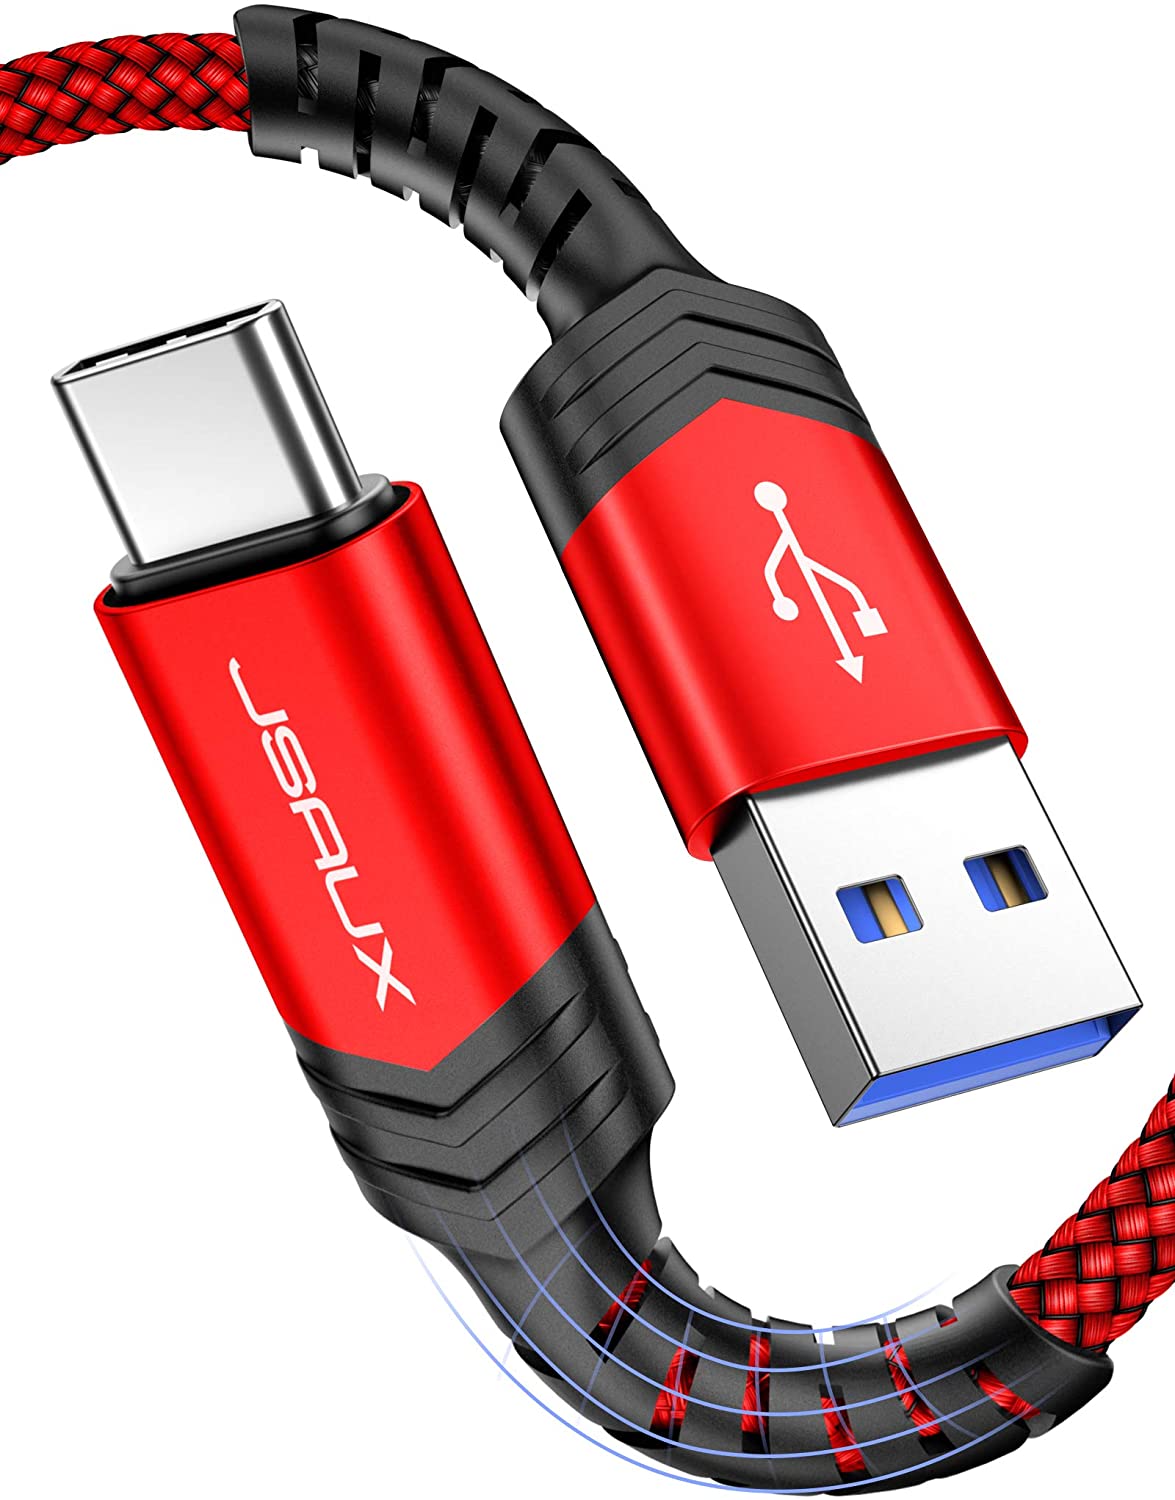 STRONG USB 3.0 Type C Cable [2 Pack, 6.6ft/2M] , JSAUX Fast Charging 3A USB C Cables.